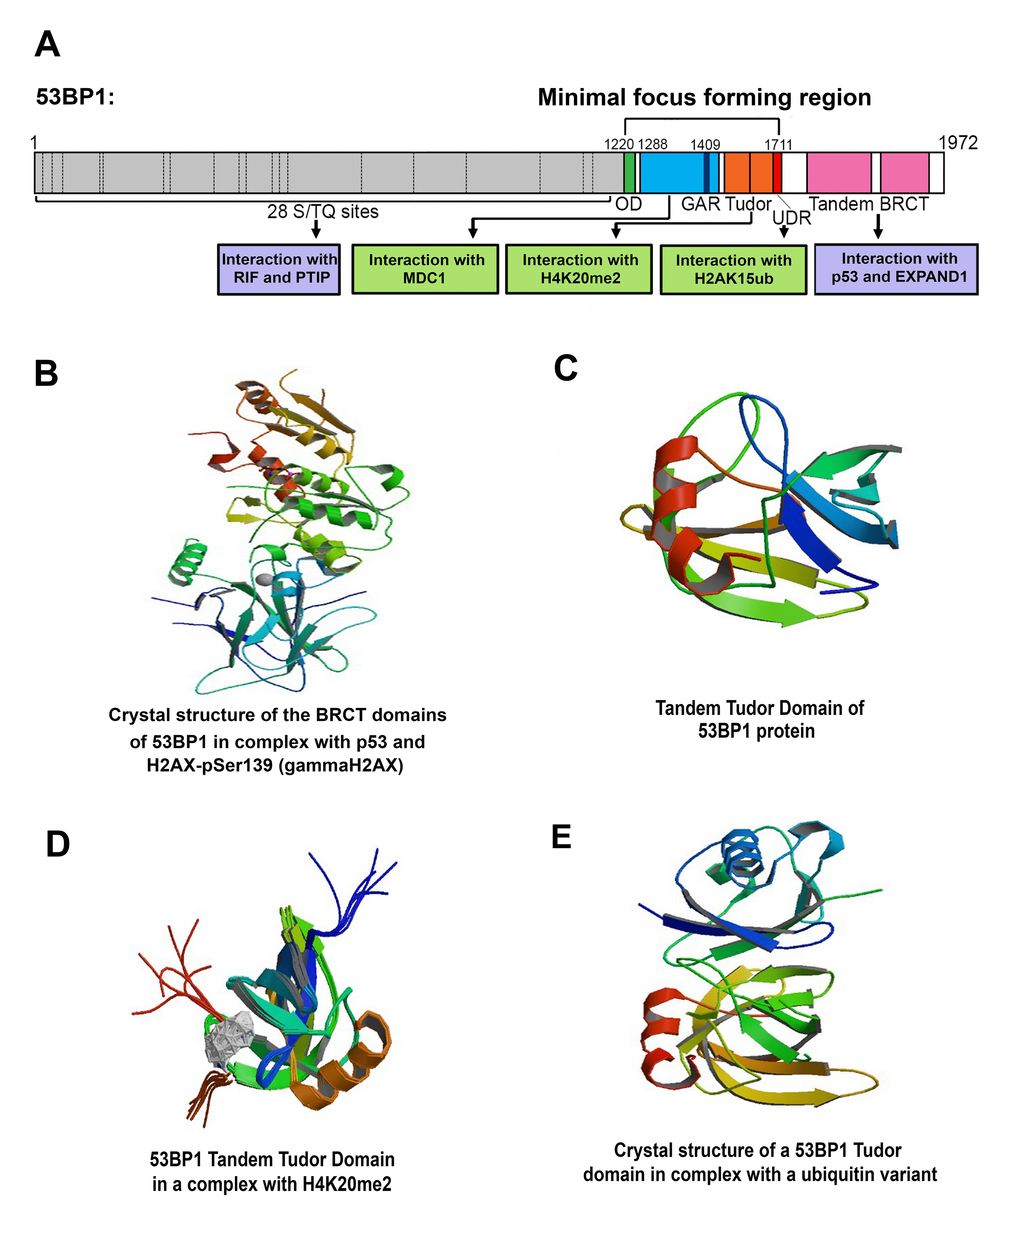 (A) Structural domains of the 53BP1 protein and its interaction partners (partially adapted from [101]). (B) Crystal structure of the BRCT domains of 53BP1 in complex with p53 and H2AX-pSer139 (γH2AX); (adapted from PDB protein database, authors: Day M., Oliver, A.W., Pearl, L.H. (C) Structure of tandem Tudor domains (http://www.rcsb.org/3d-view/1XNI/1 [107];). (D) A tandem Tudor domain of the 53BP1 protein in complex with H4K20me2 (http://www.rcsb.org/structure/2LVM [100];). (E) Crystal structure of a 53BP1 Tudor domain in complex with a ubiquitin variant (http://www.rcsb.org/structure/5J26; author: Wan et al., to be published). The structural data in panels B-E were derived from the Protein Data Bank (PDB).